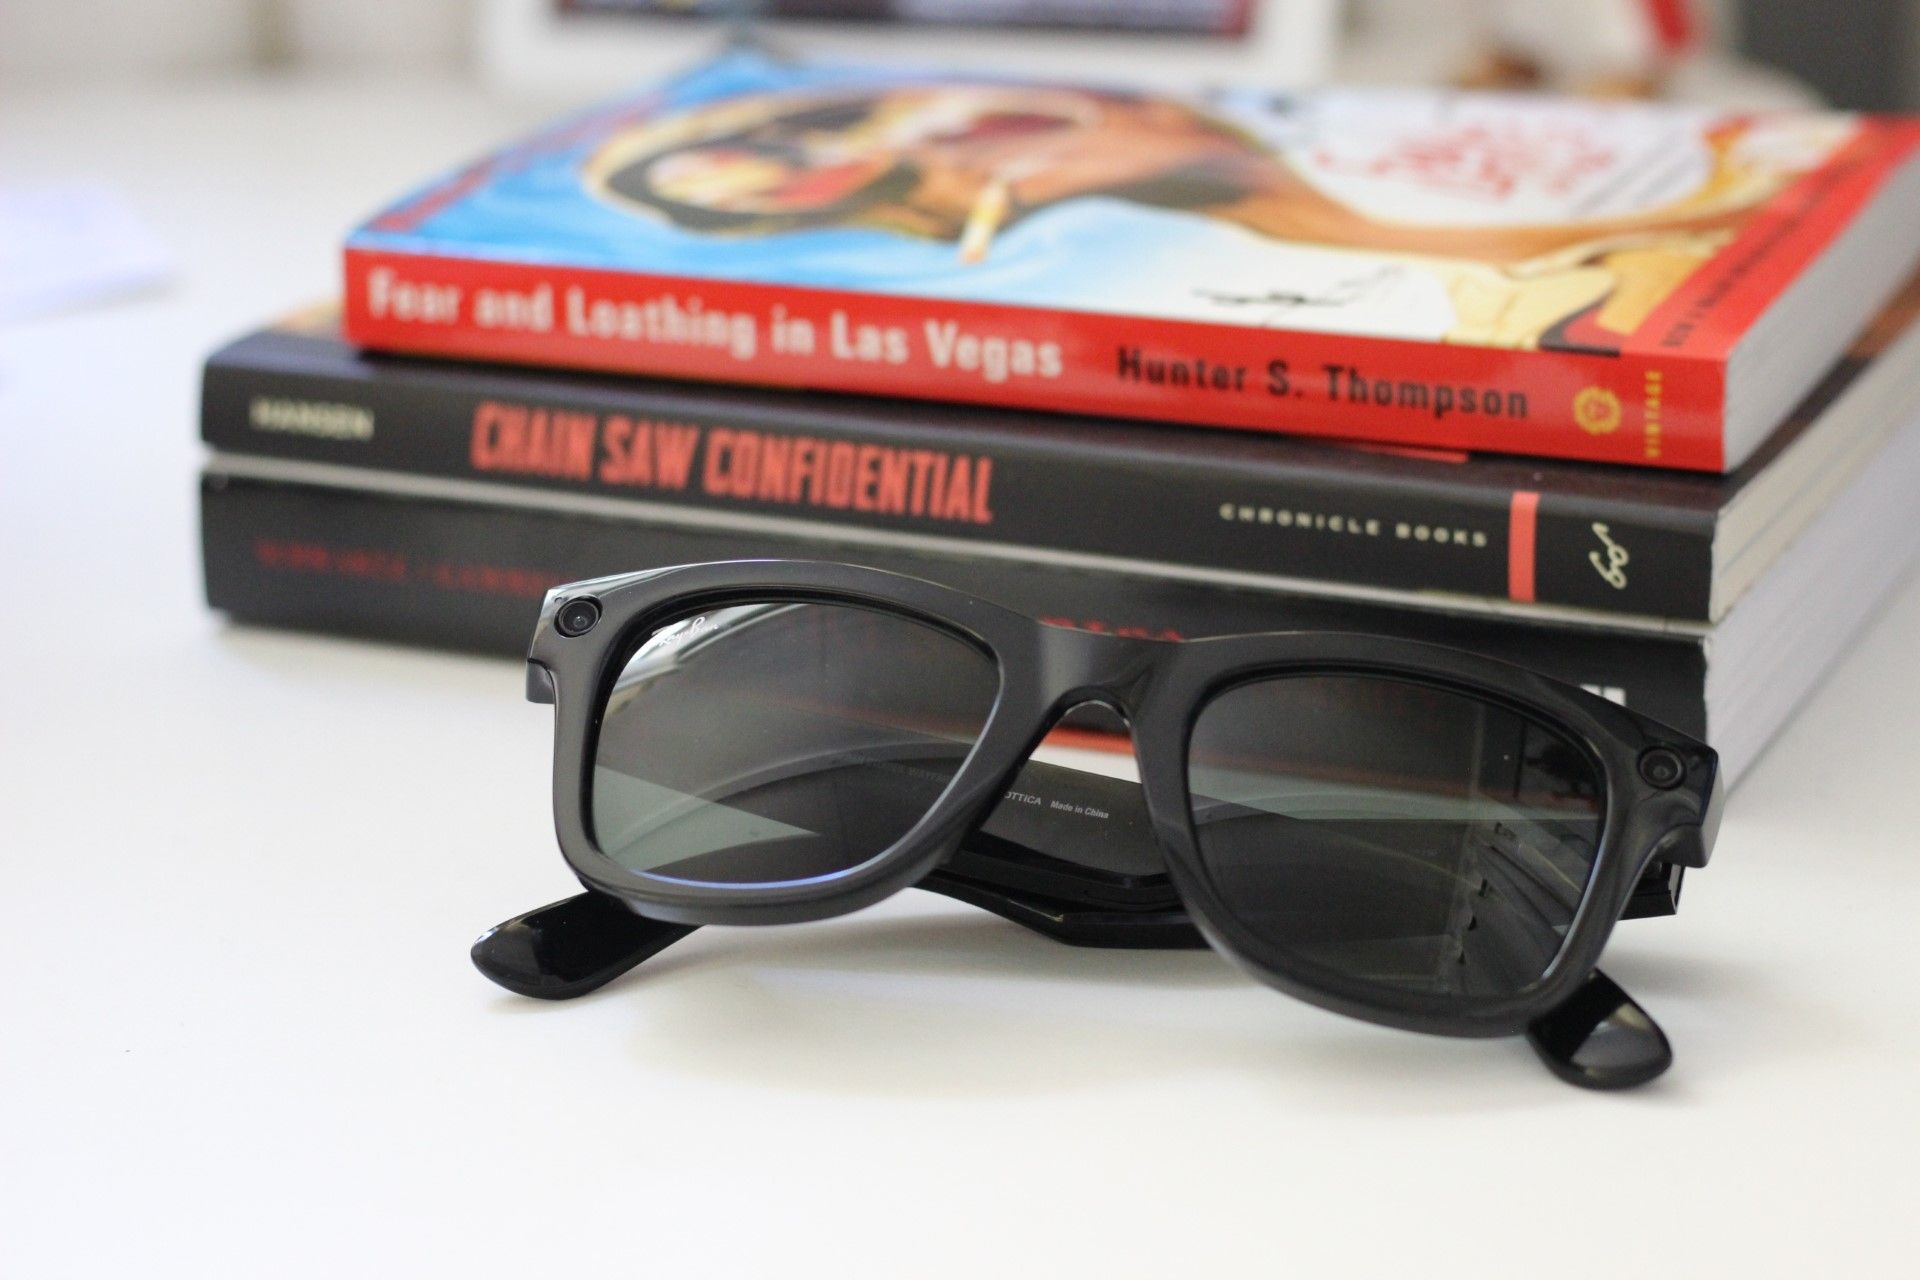 Ray-Ban Stories on a desk in front of some books